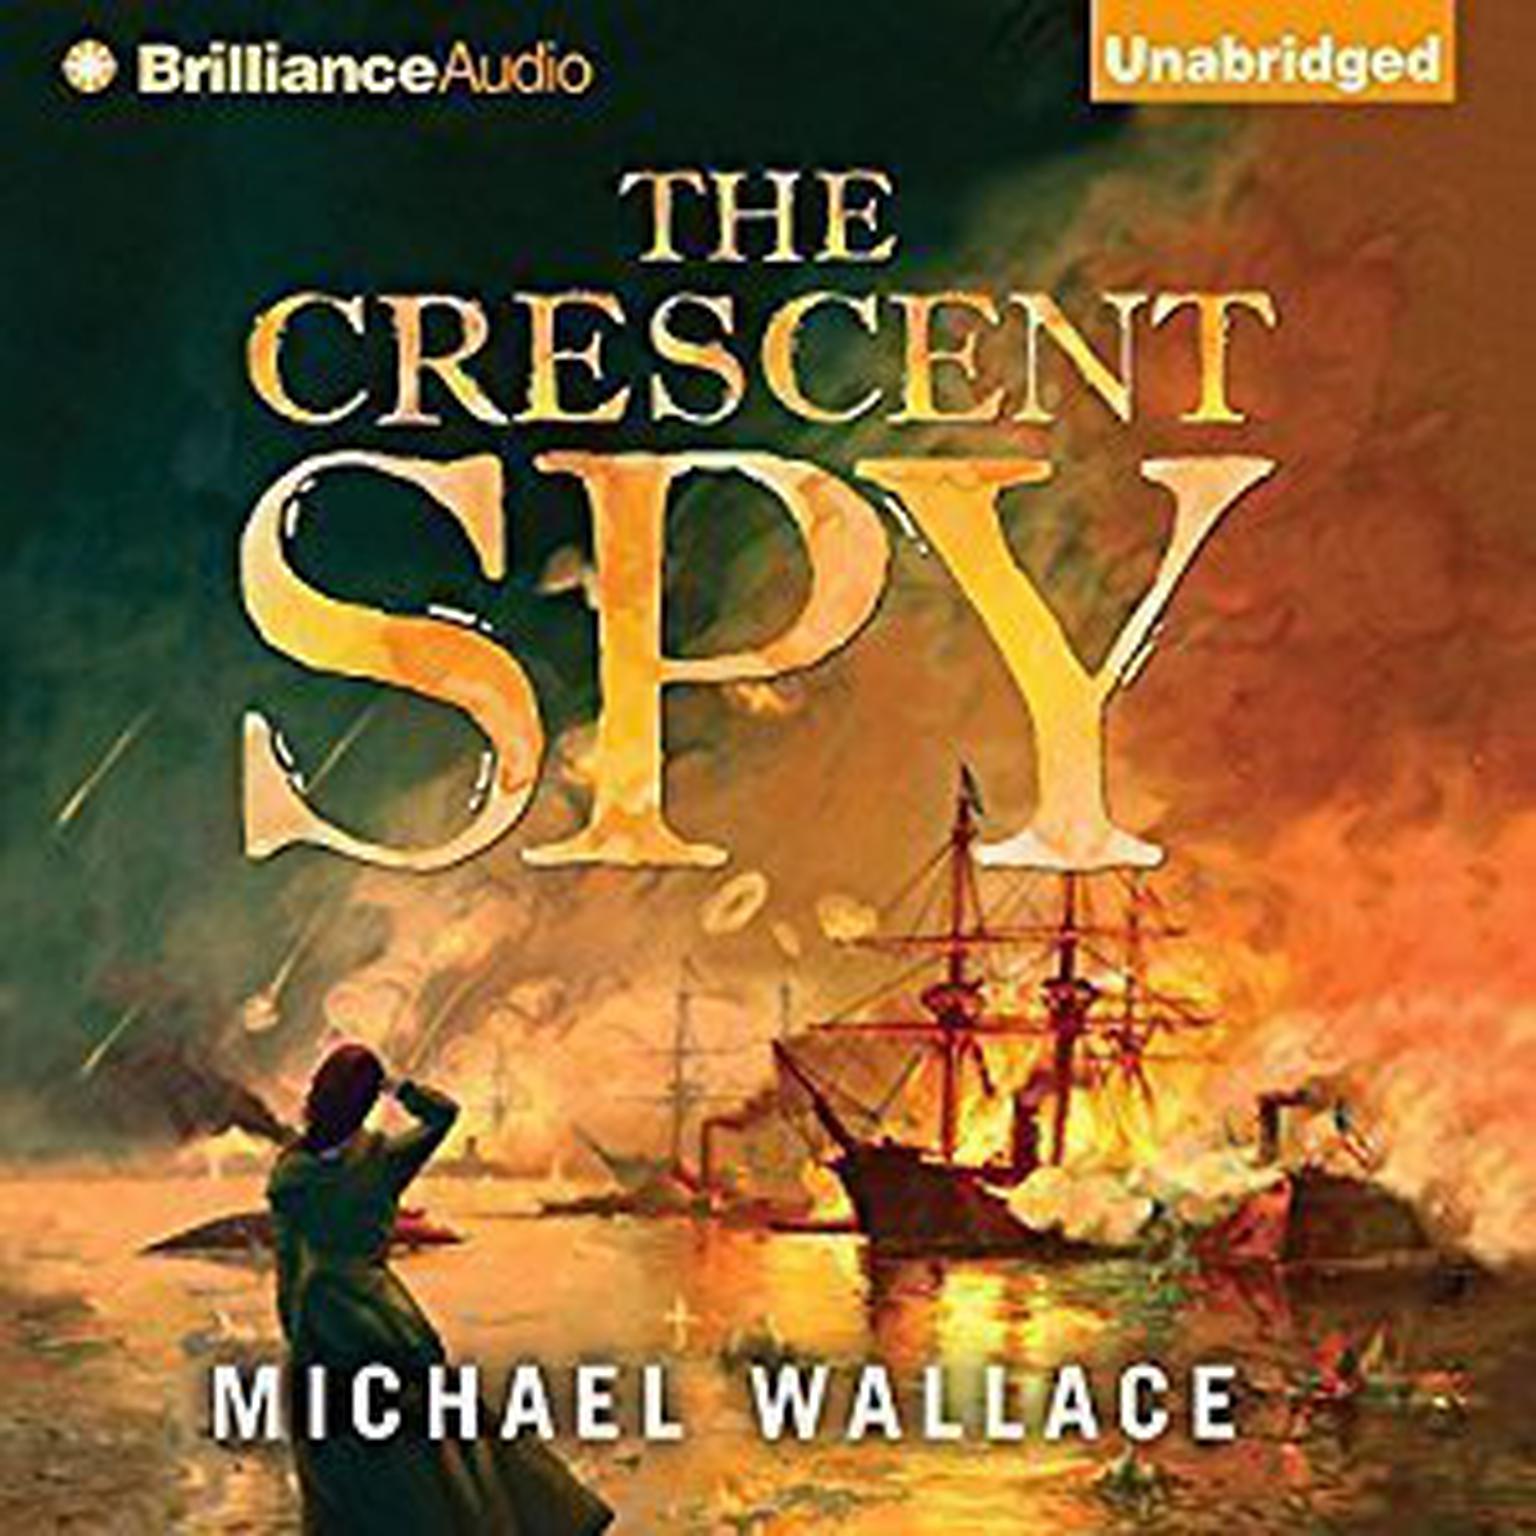 The Crescent Spy Audiobook, by Michael Wallace